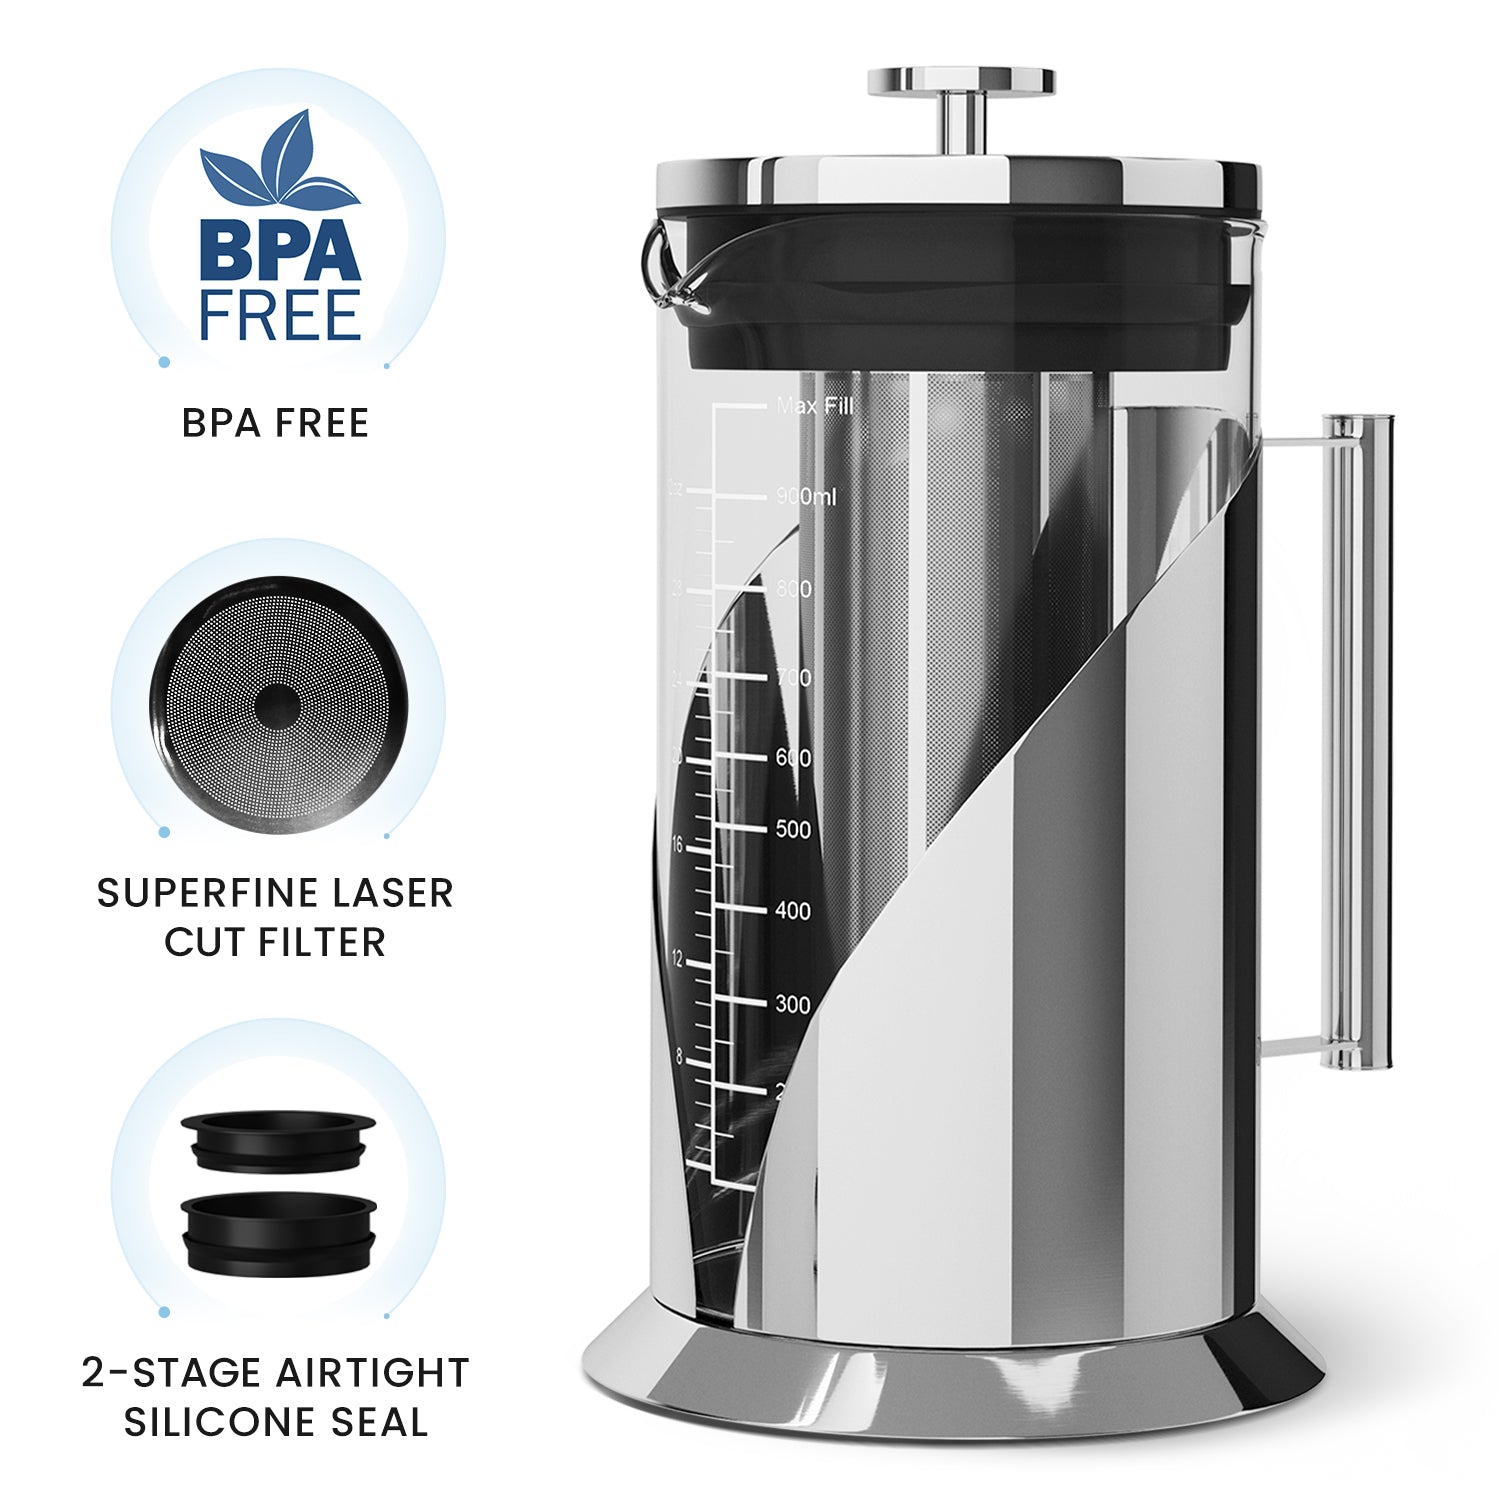 French Press by Cafe Du Chateau - Upper Echelon Products